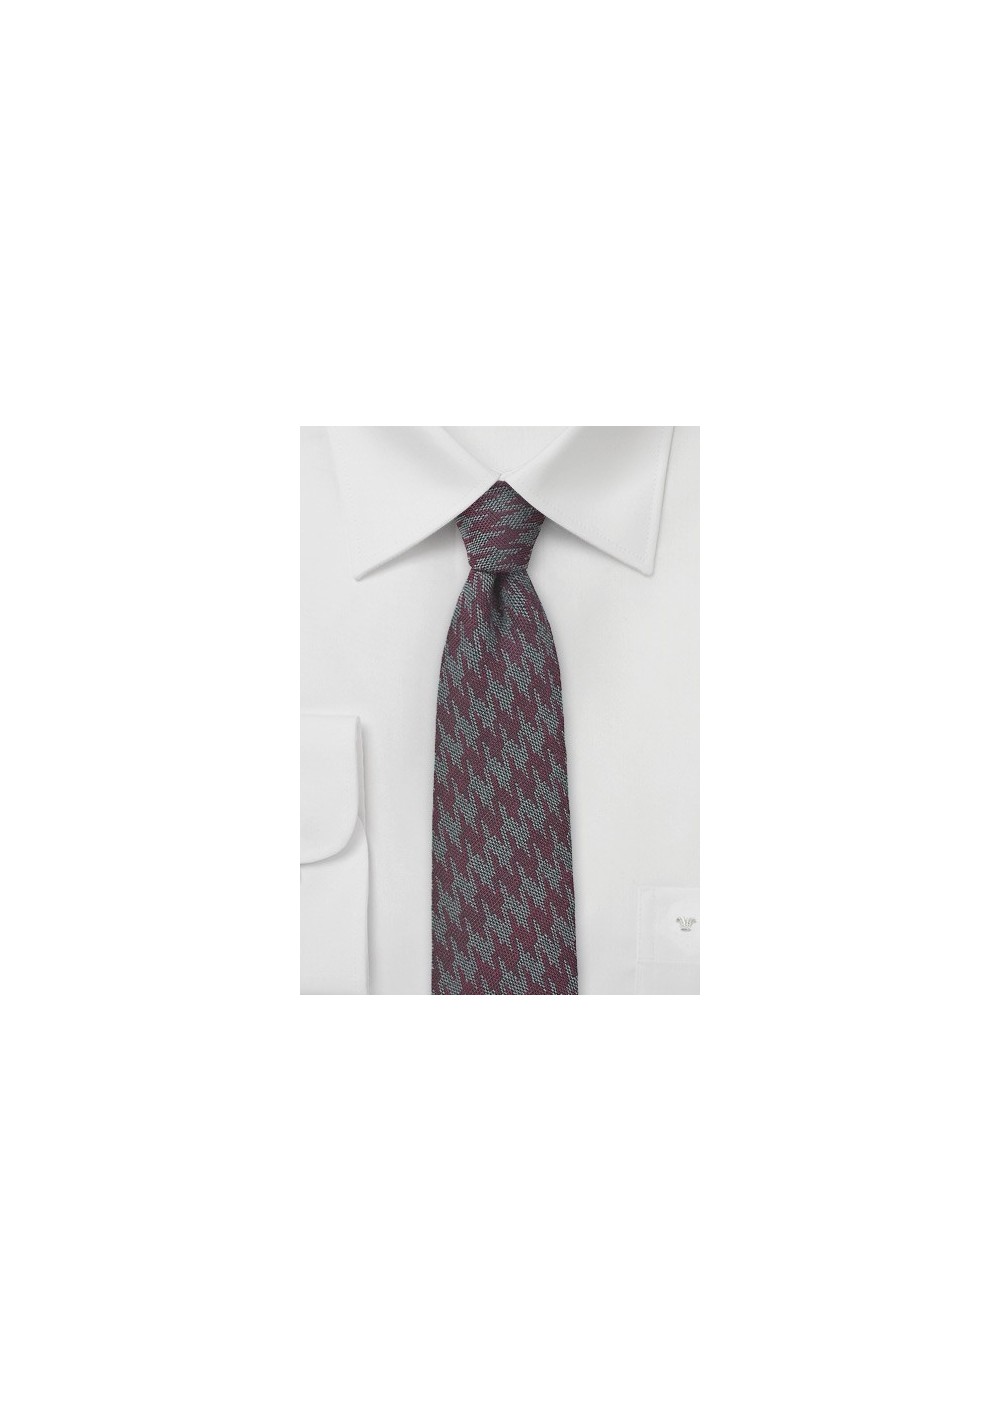 Wool Houndstooth Check Tie in Burgundy and Gray